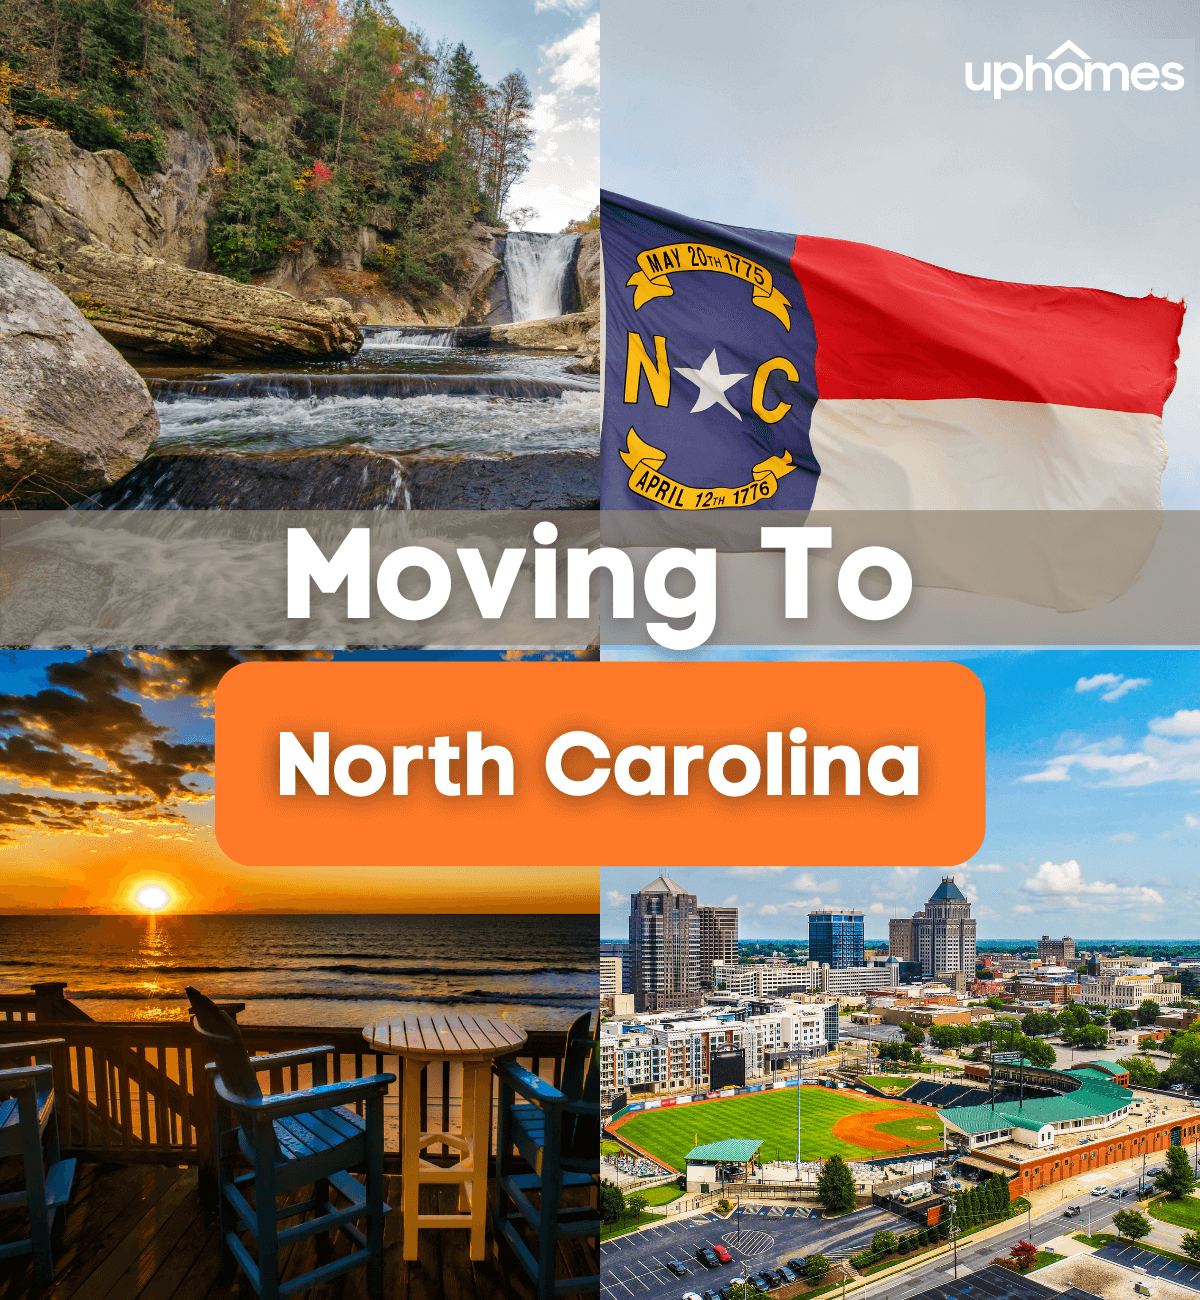 Moving to North Carolina - Pros and Cons of Living in NC. Relocating to the state of North Carolina